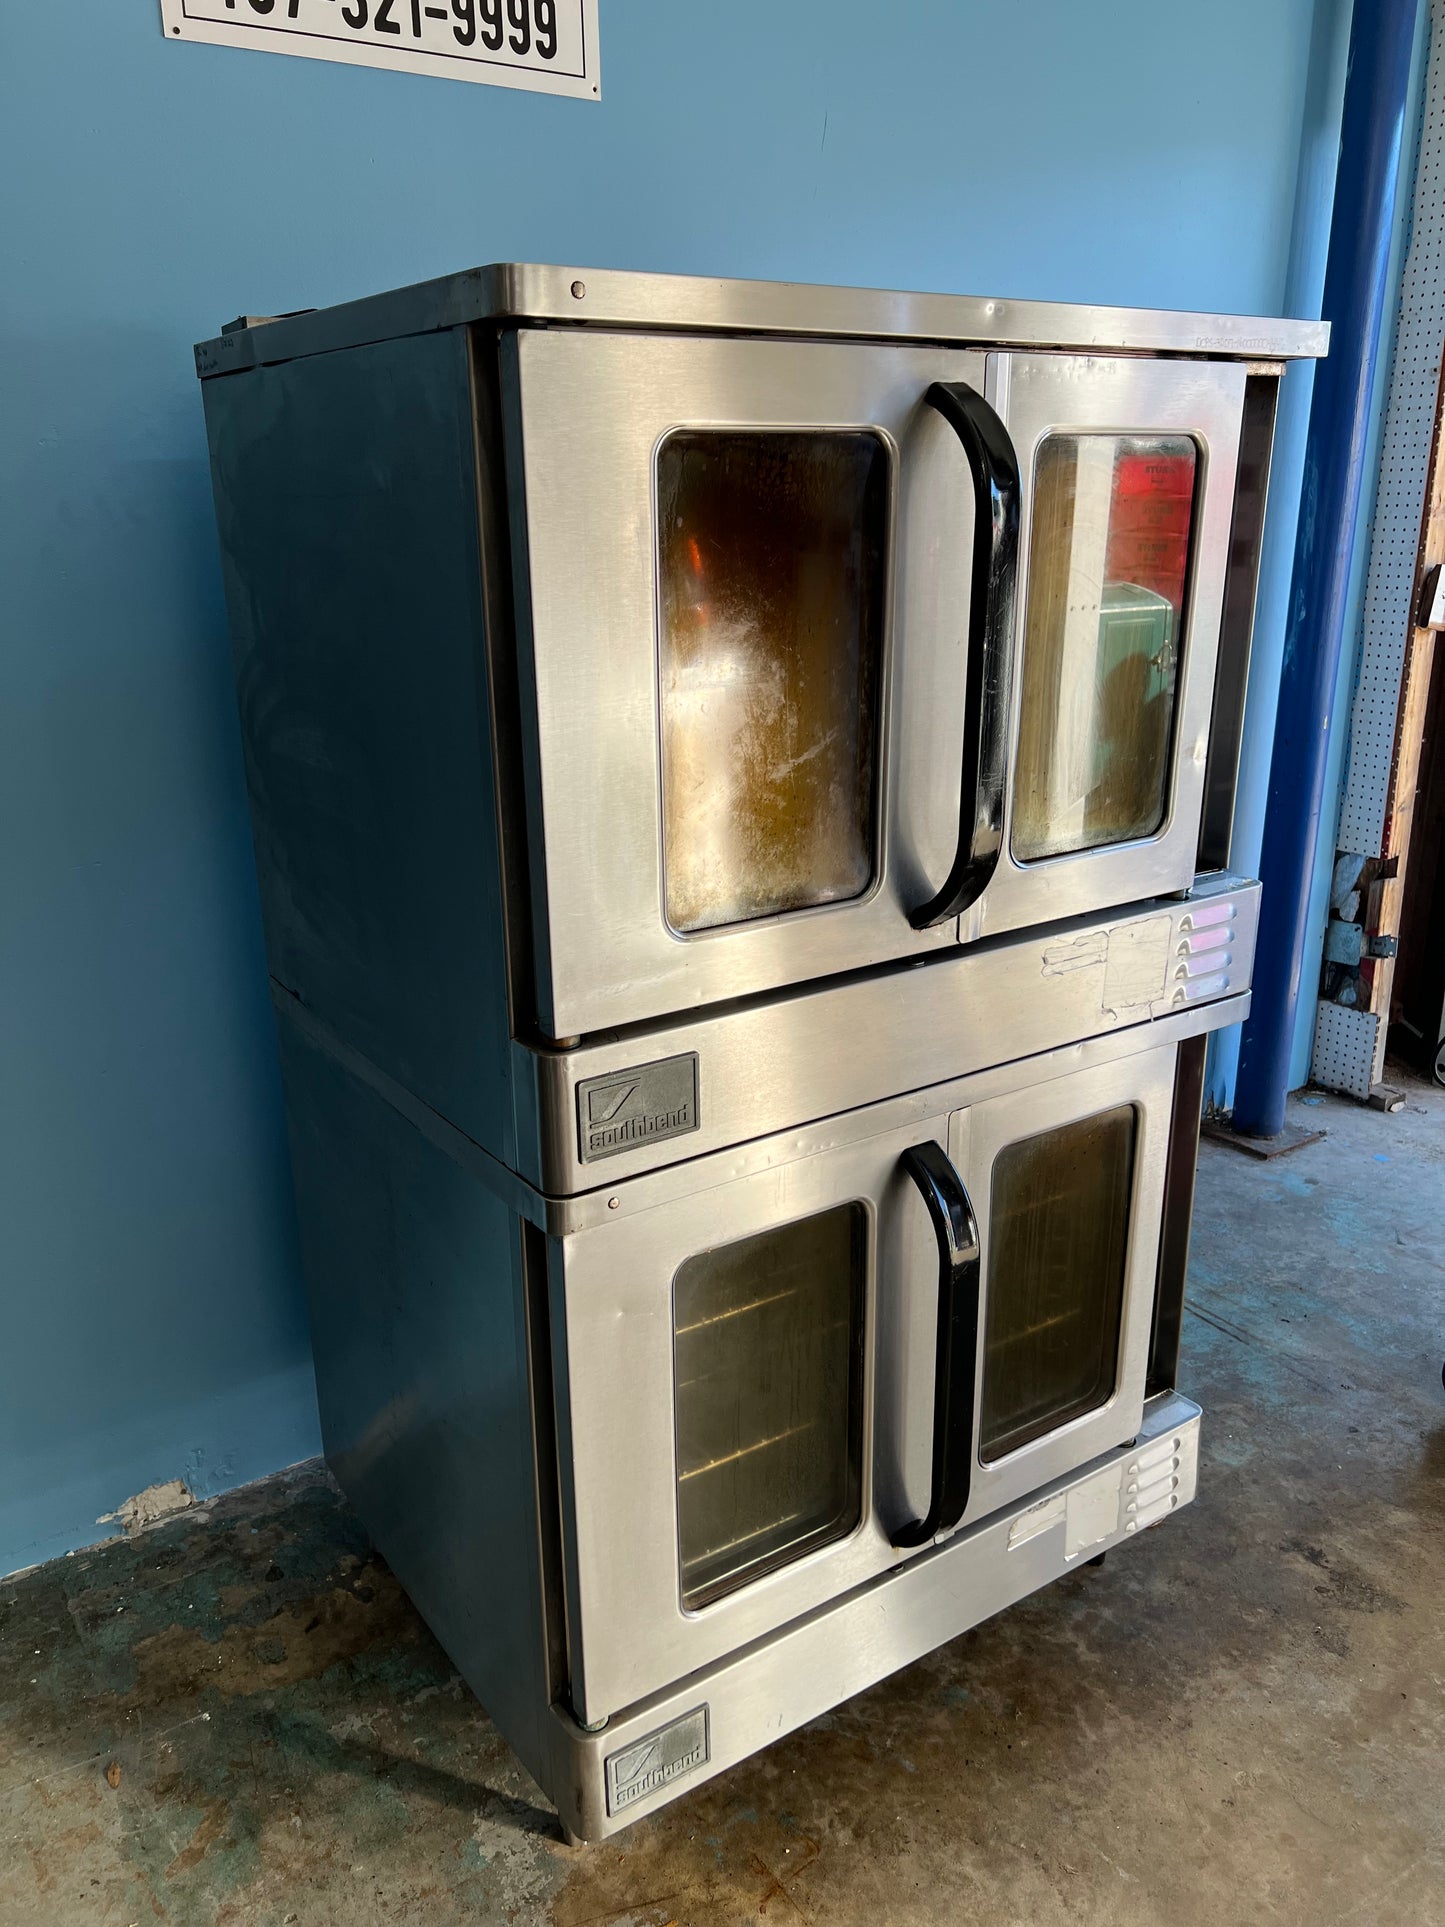 Southbend Double Deck Marathoner Gold Gas Convection Oven - Preowned -